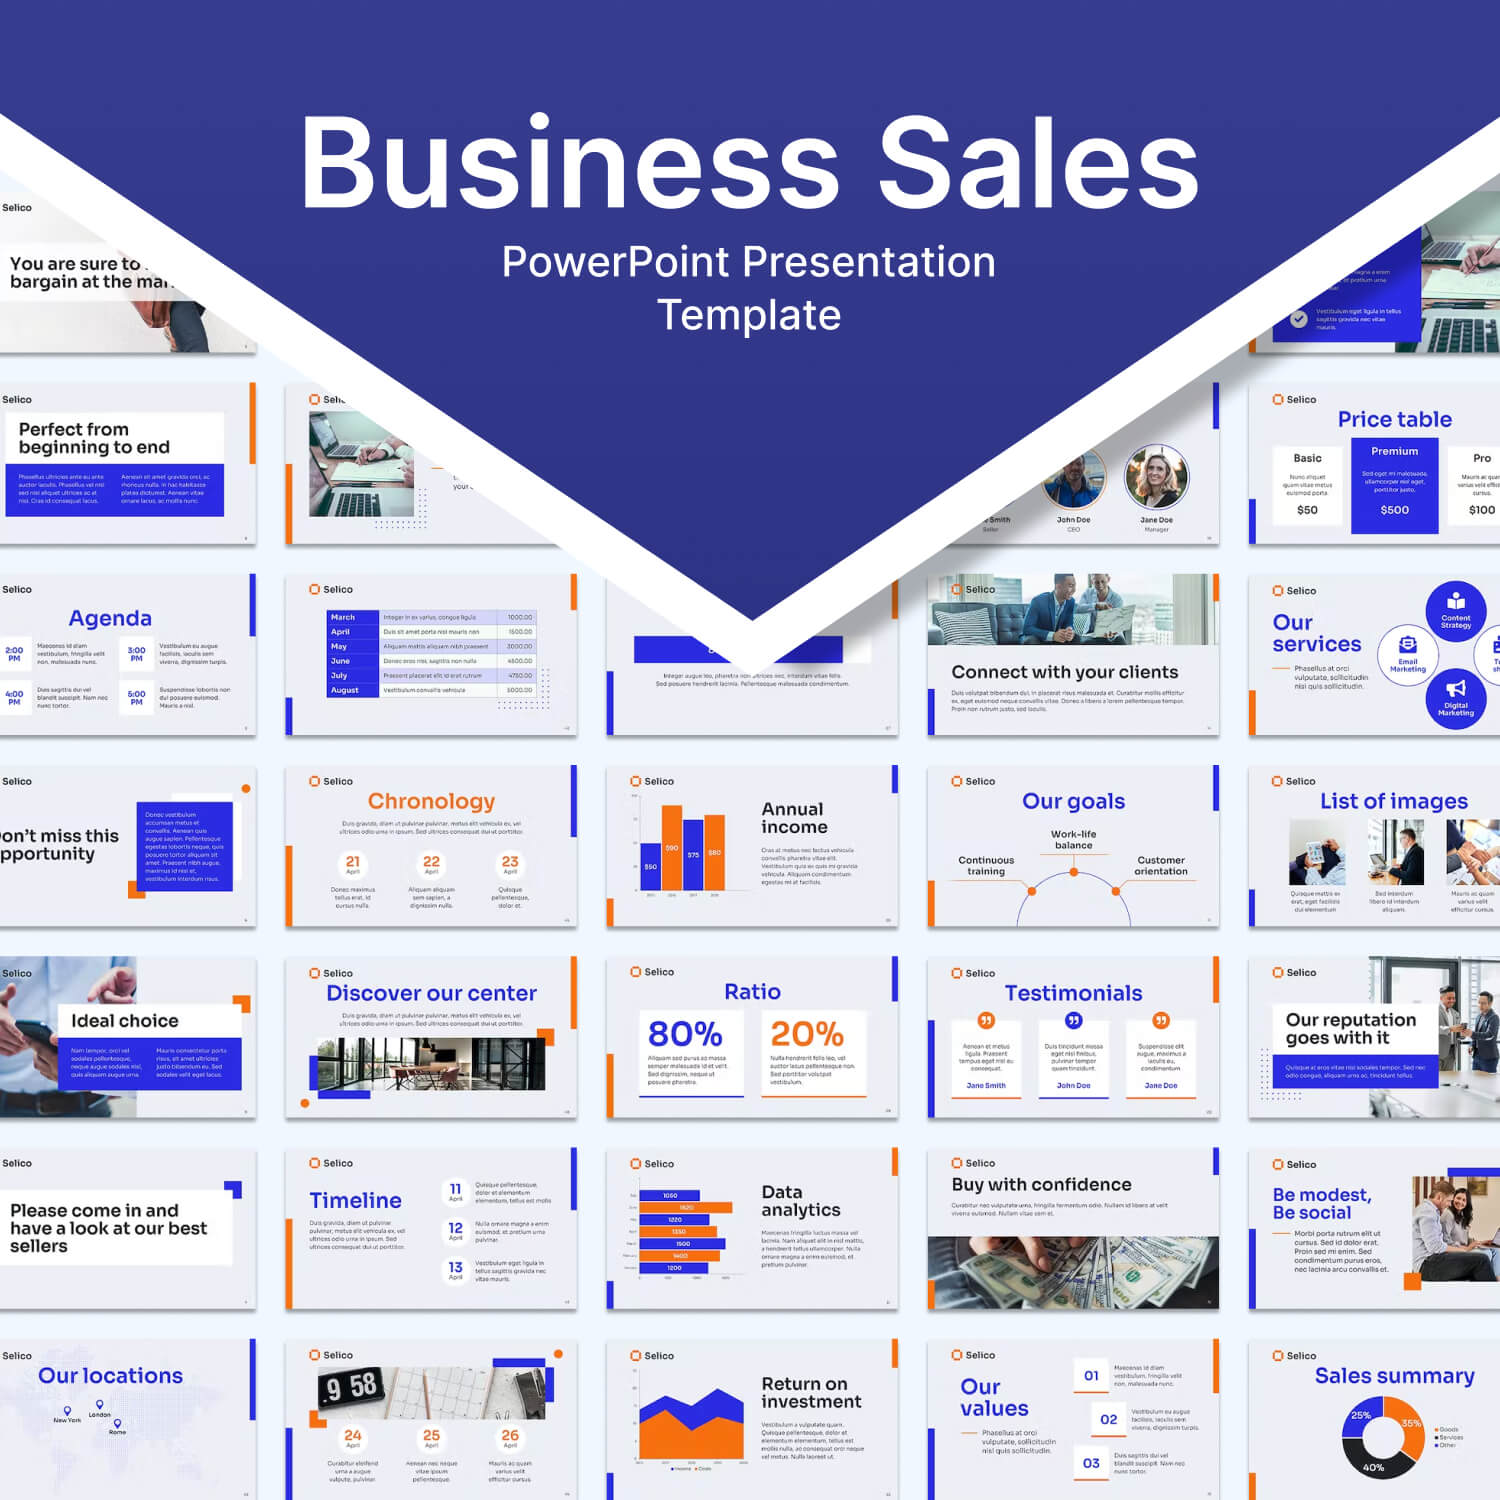 Business Sales PowerPoint Presentation Template.